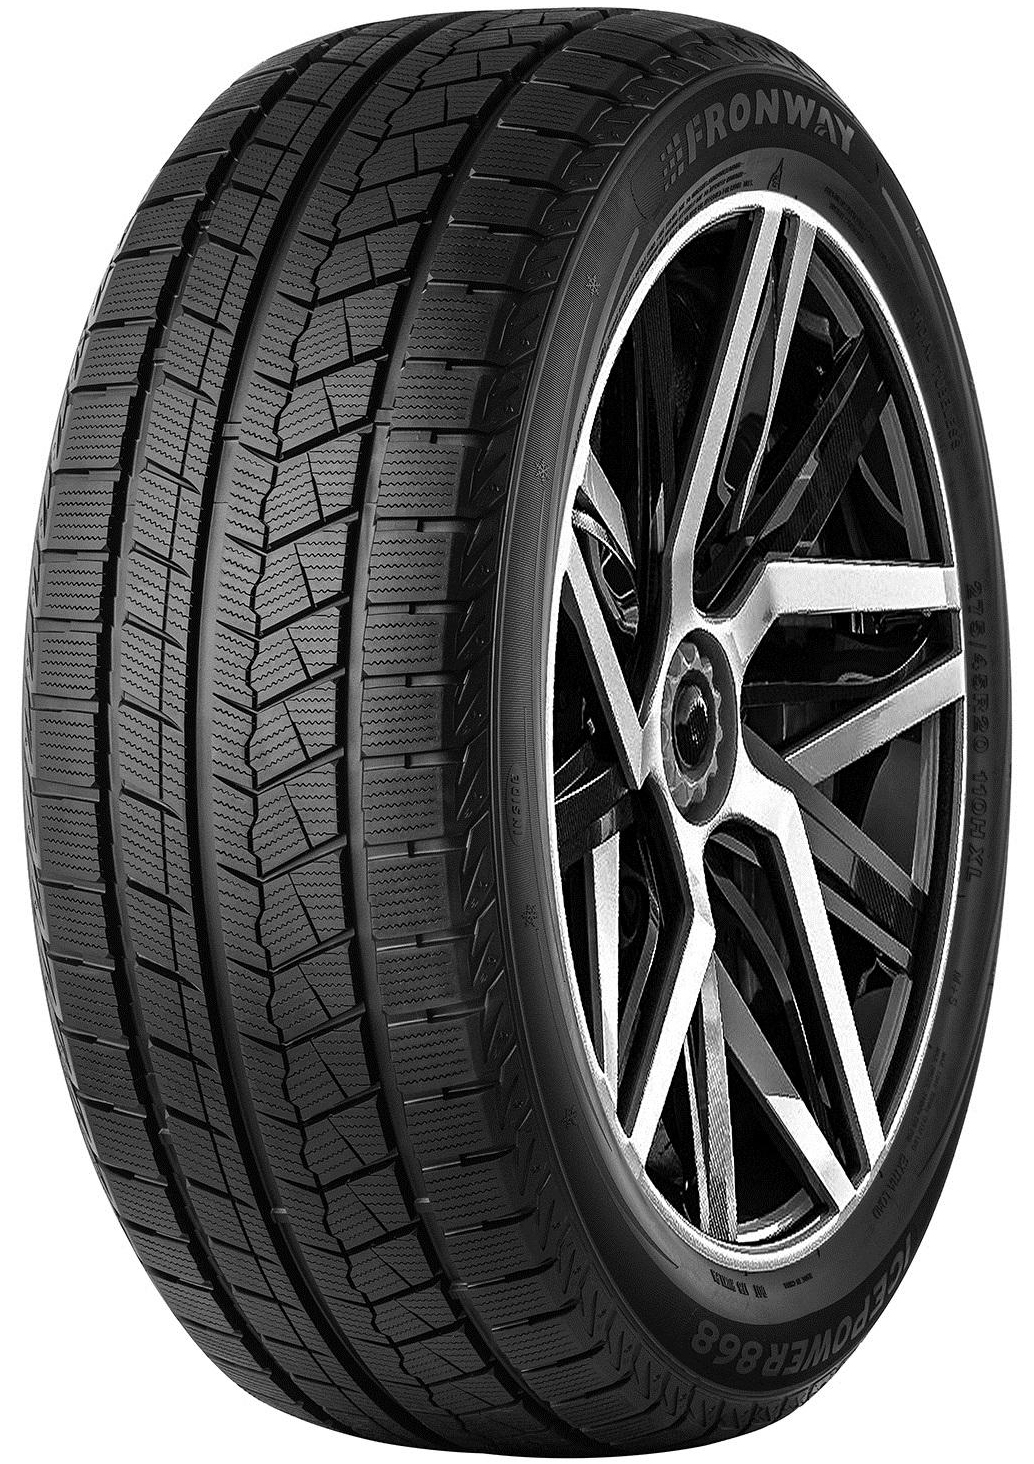    Fronway Icepower 868 235/55 R17 